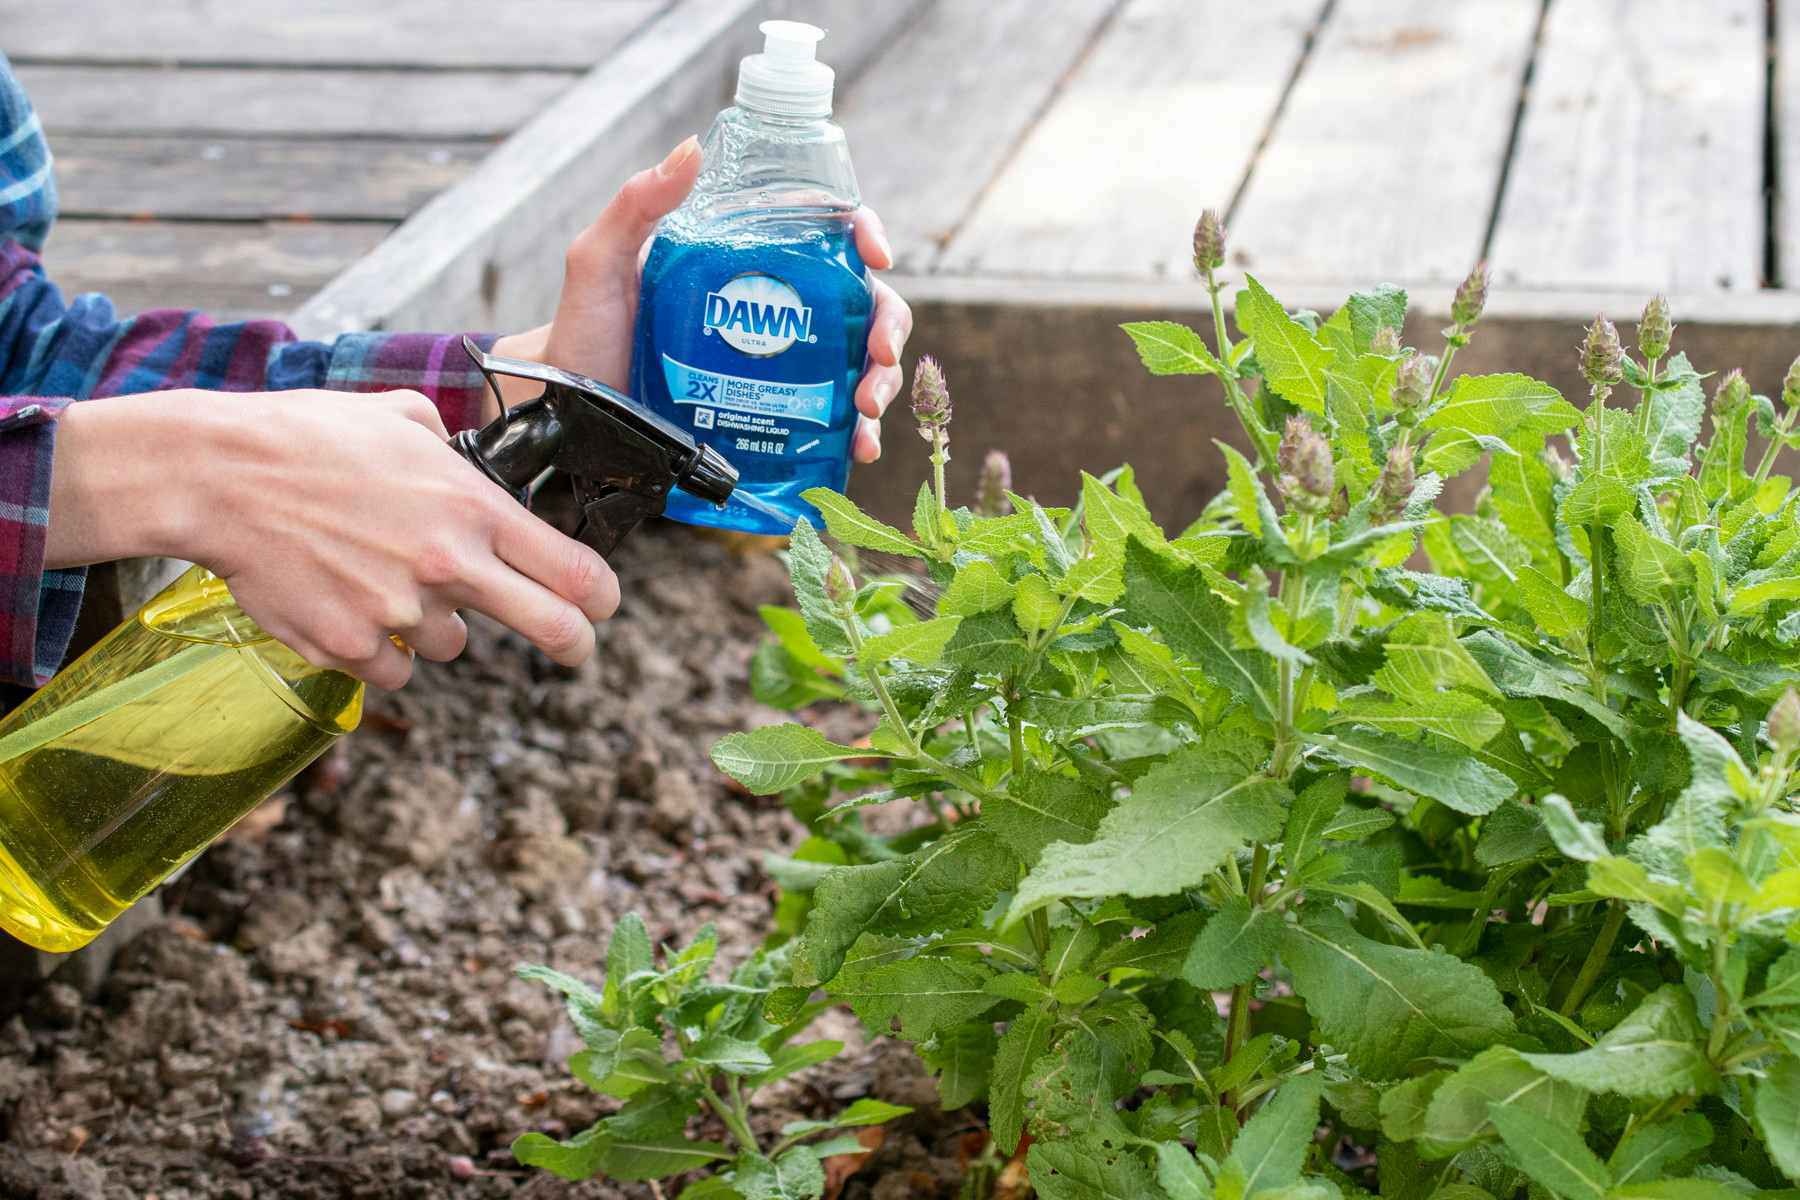 Person spraying a Dawn dish soap solution onto plants with a spray bottle